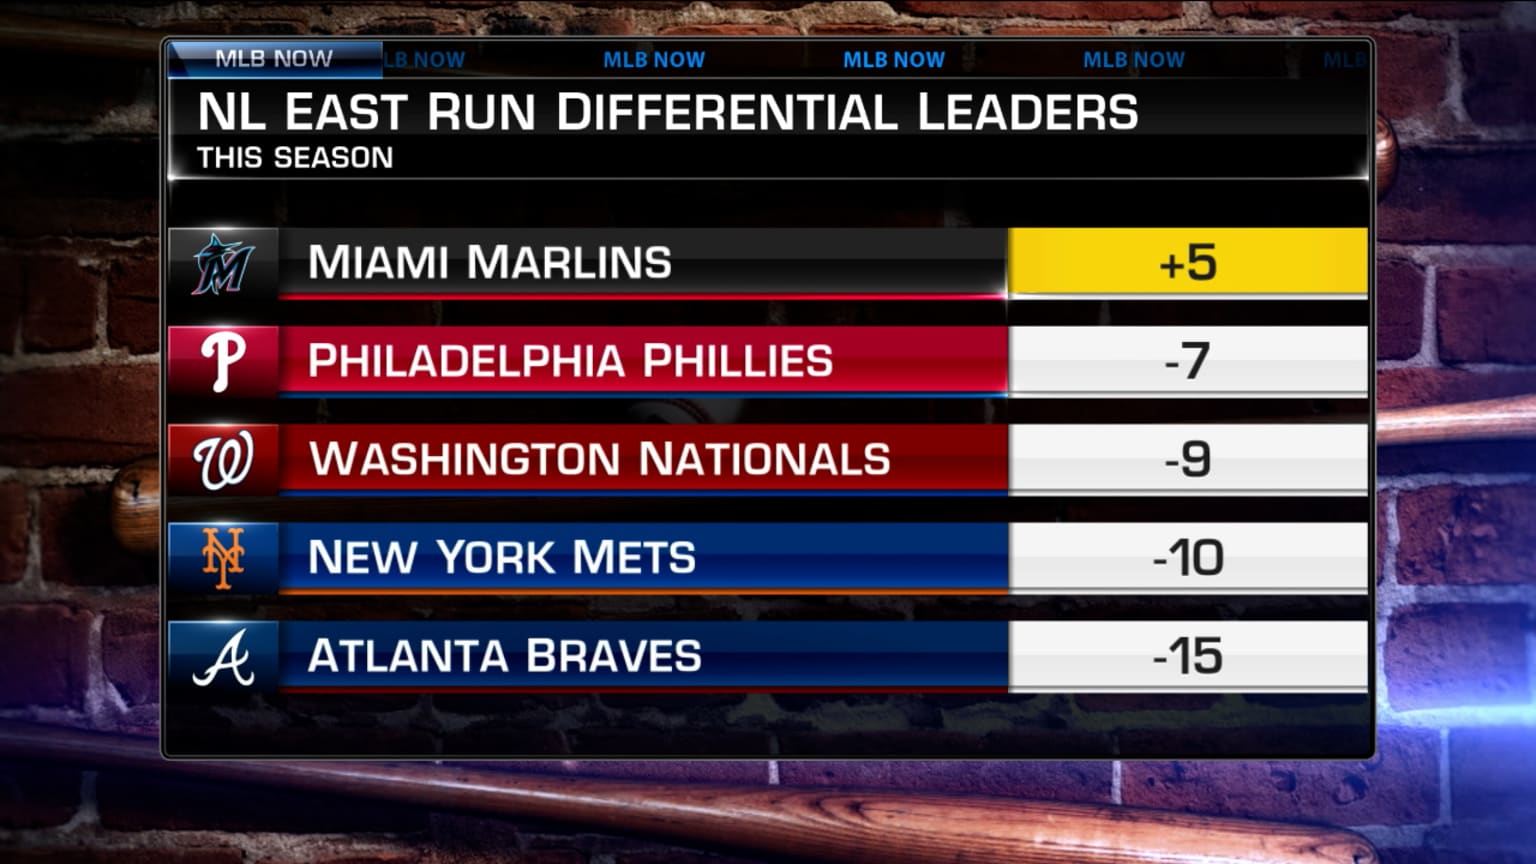 MLB Now on run differential 05/17/2021